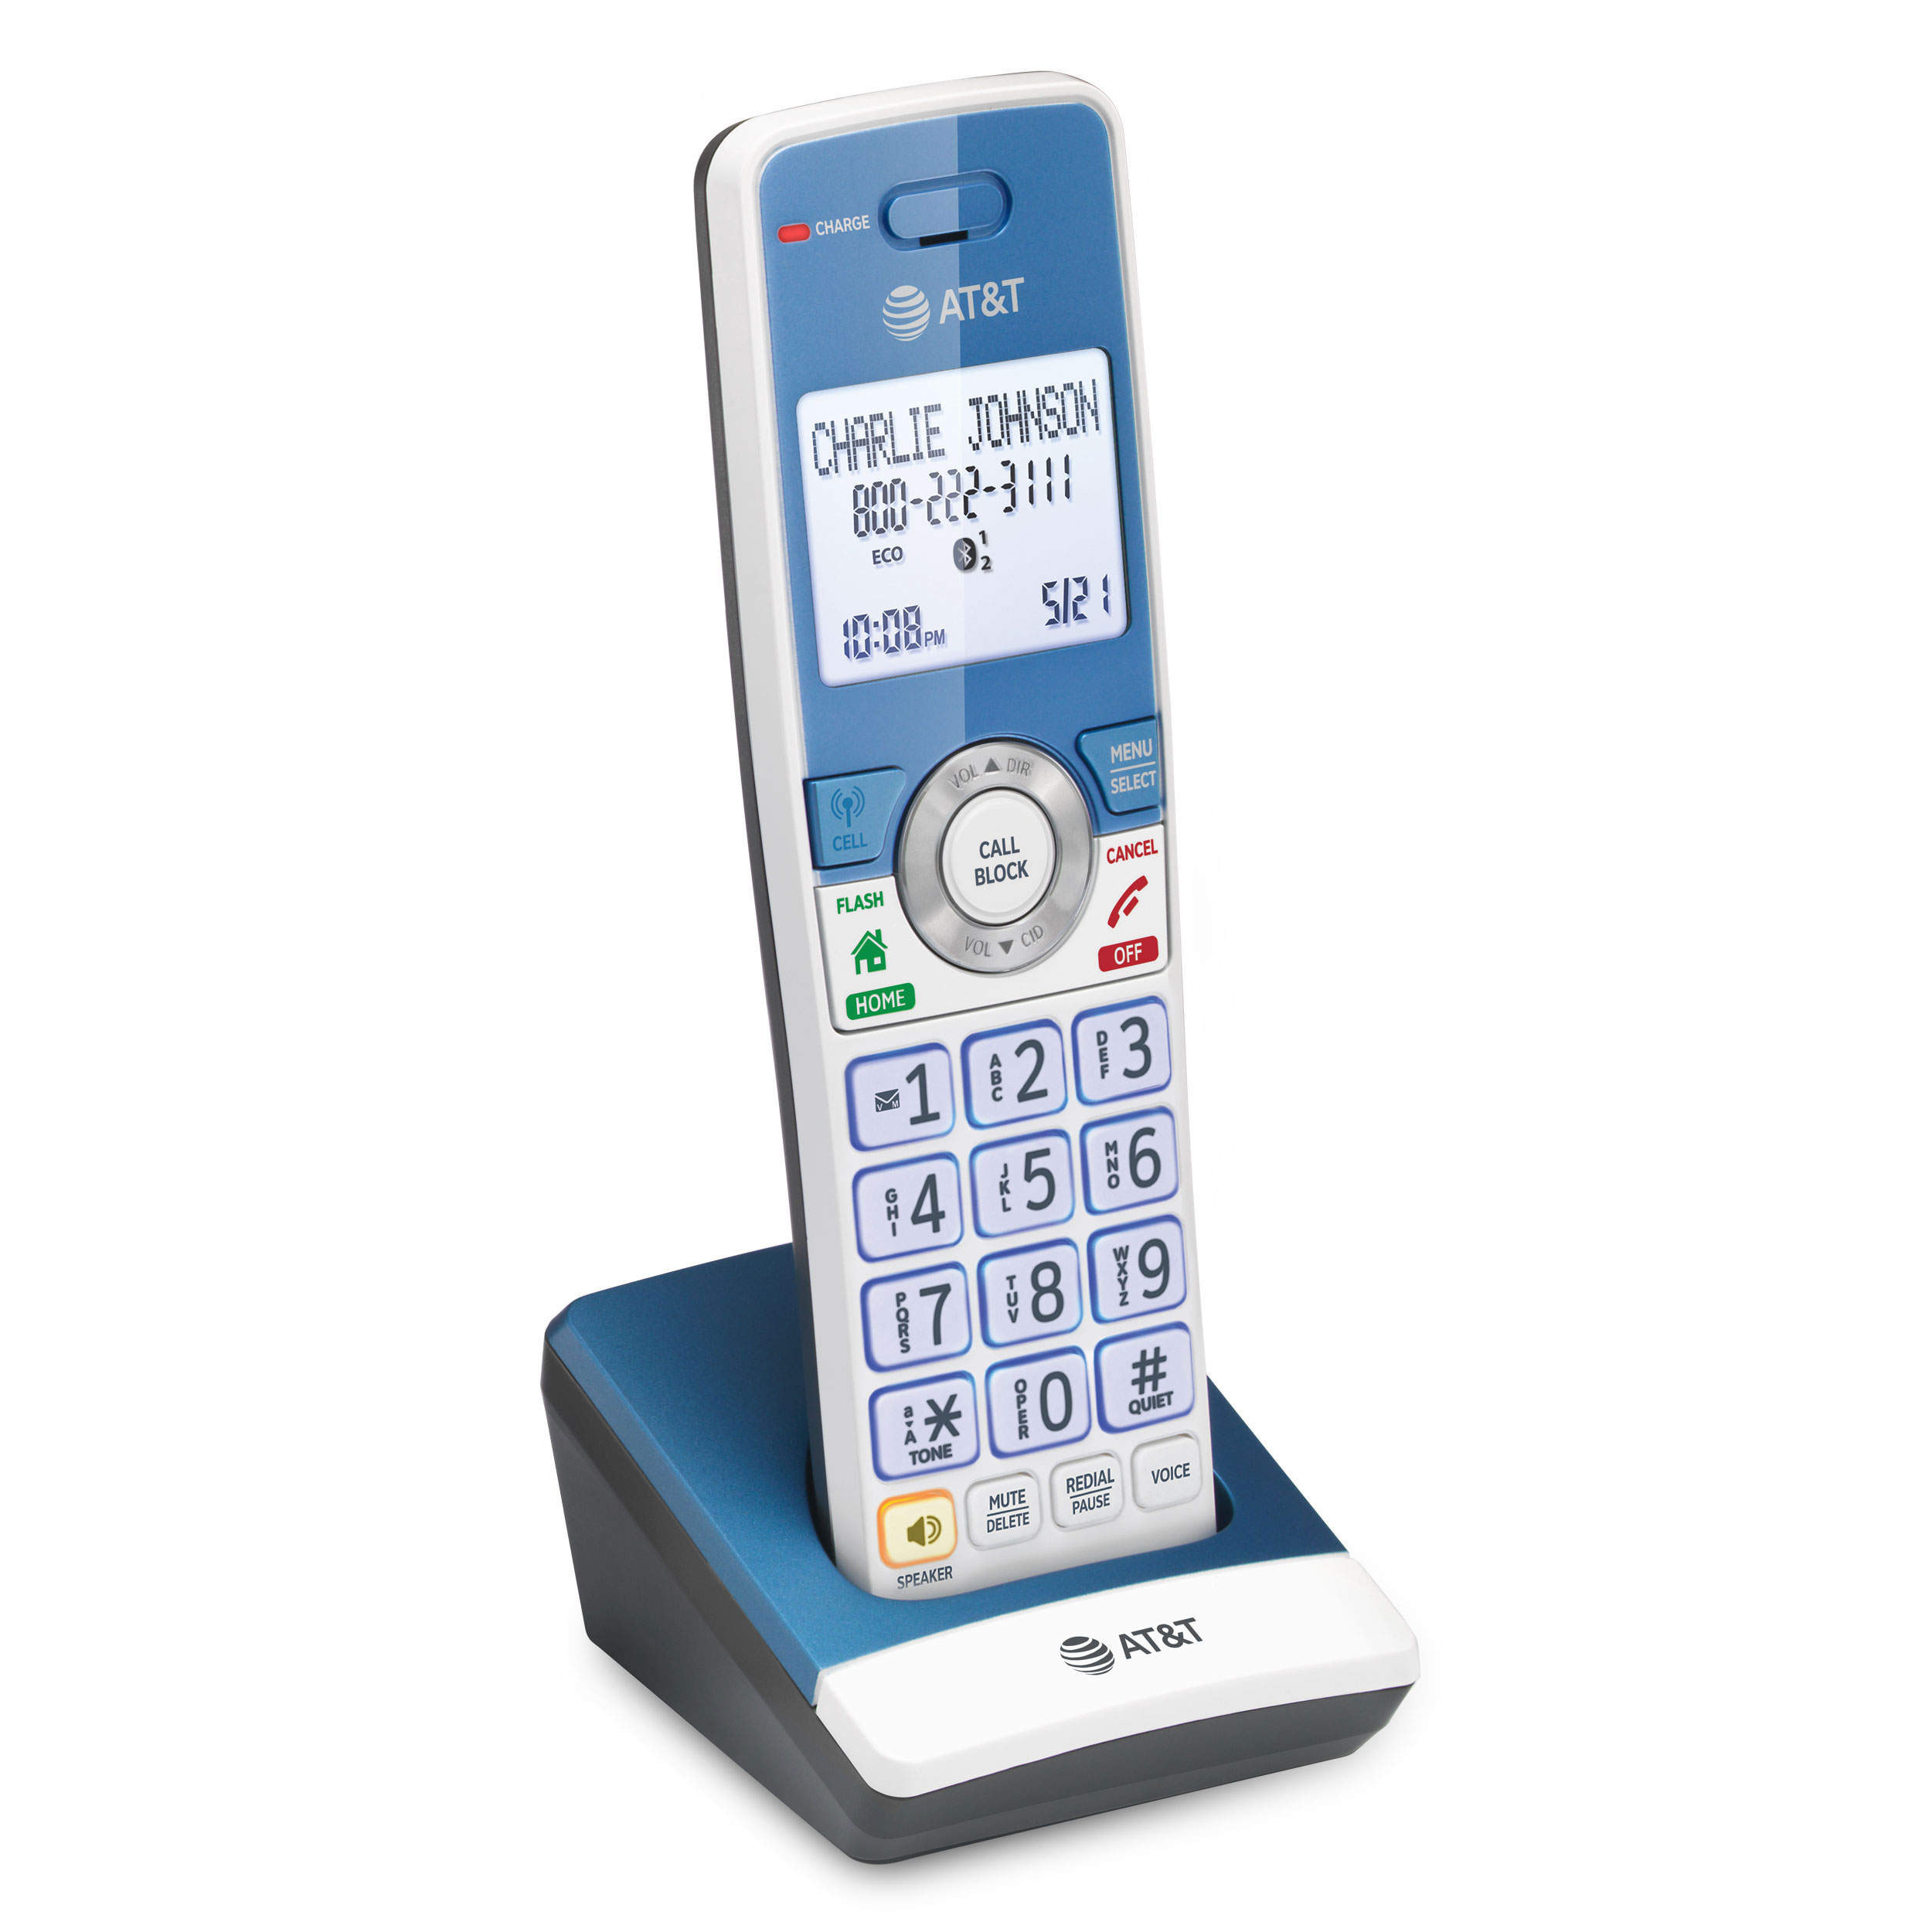 5-Handset Expandable Cordless Phone with Unsurpassed Range, Bluetooth Connect to Cell™, Smart Call Blocker and Answering System - view 6